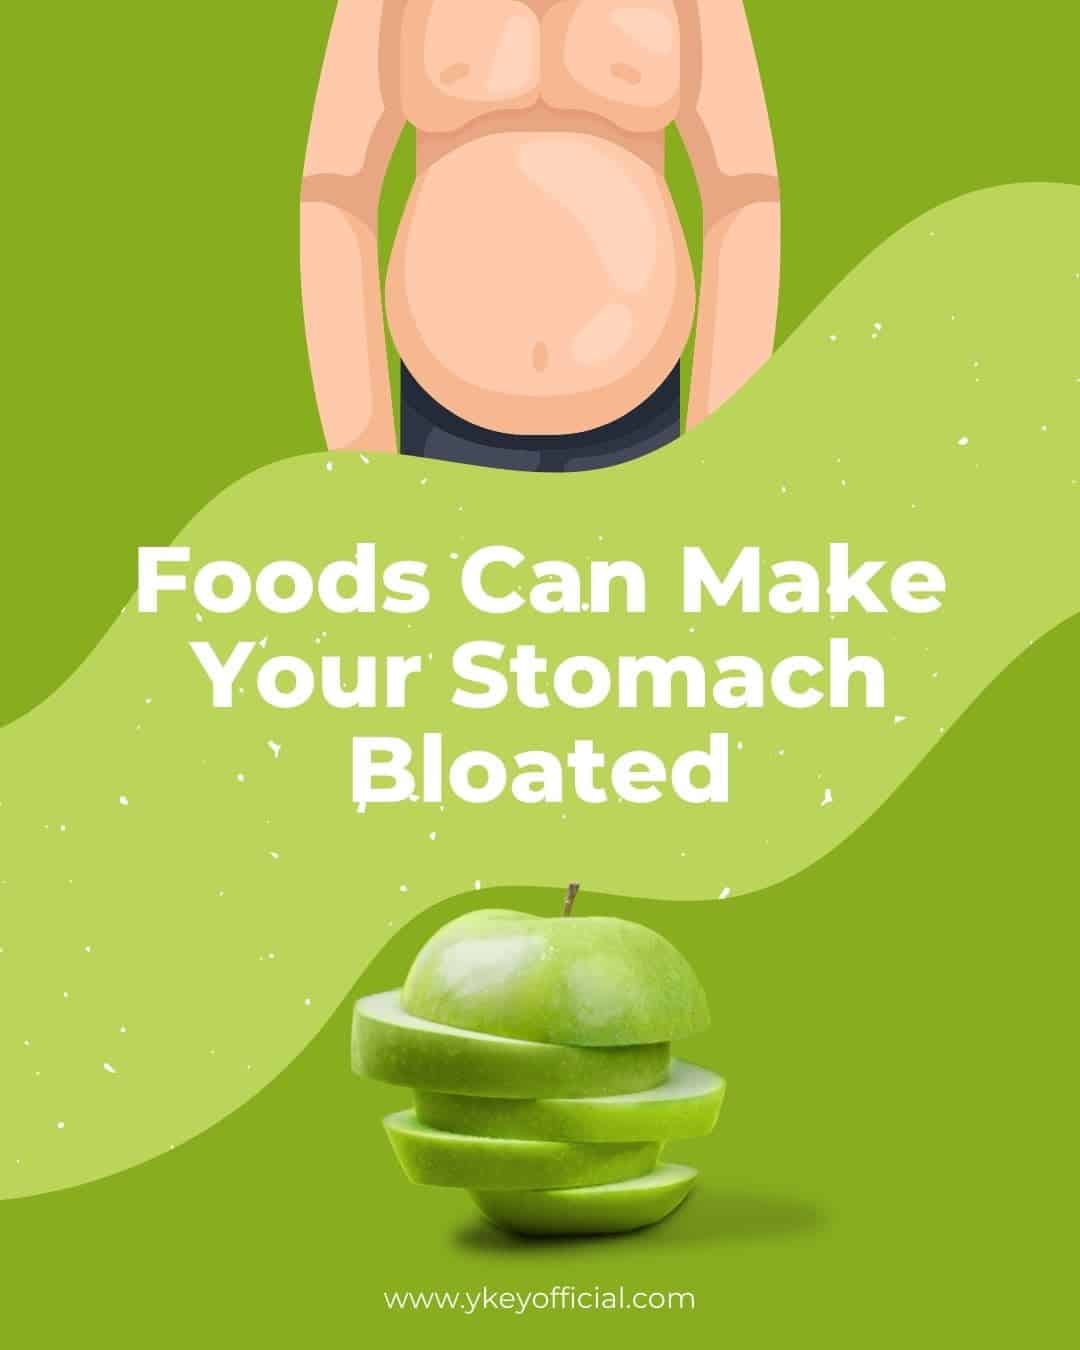 5 Foods Can Make Your Stomach Bloated (Flatulence)